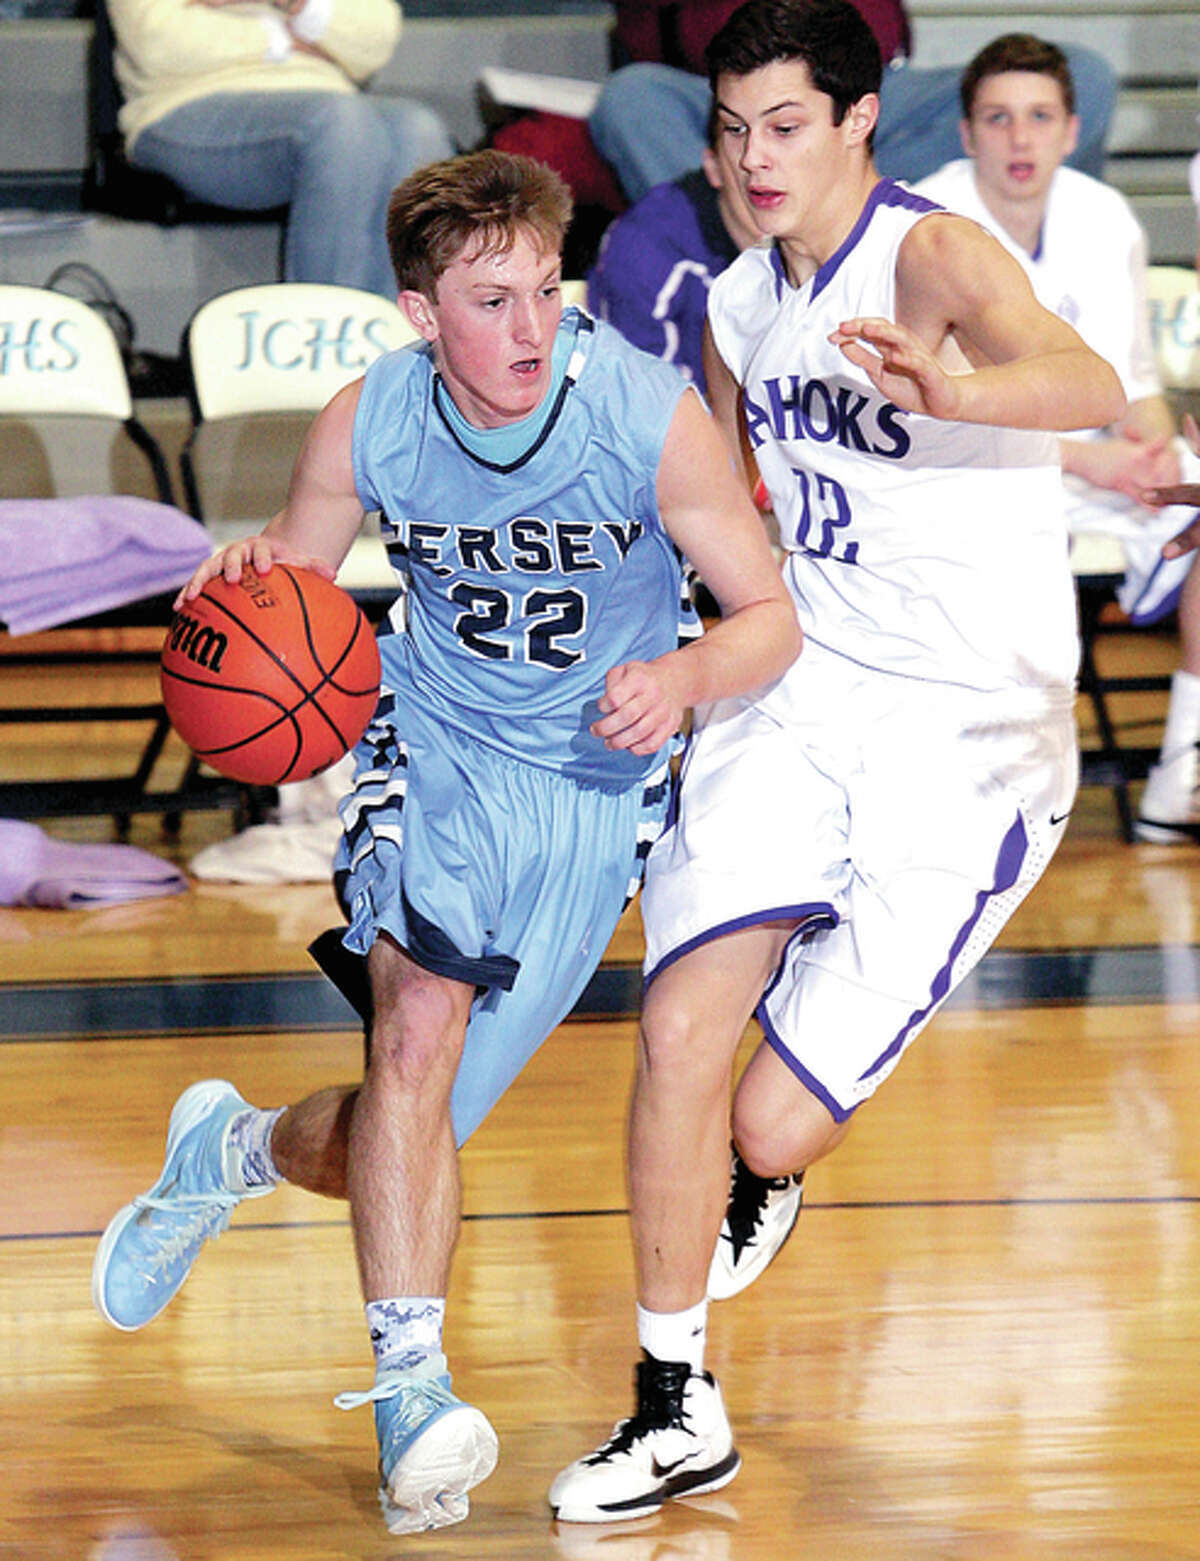 Jersey’s Zac Ridenhour, left, was one of three Panthers to score 17 points in Tuesday night’s victory over Waterloo. Jake Ridenhour and Drake Kanallakan each also netted 17 points. Zac Ridenhour is shown in action earlier this season against Collinsville.